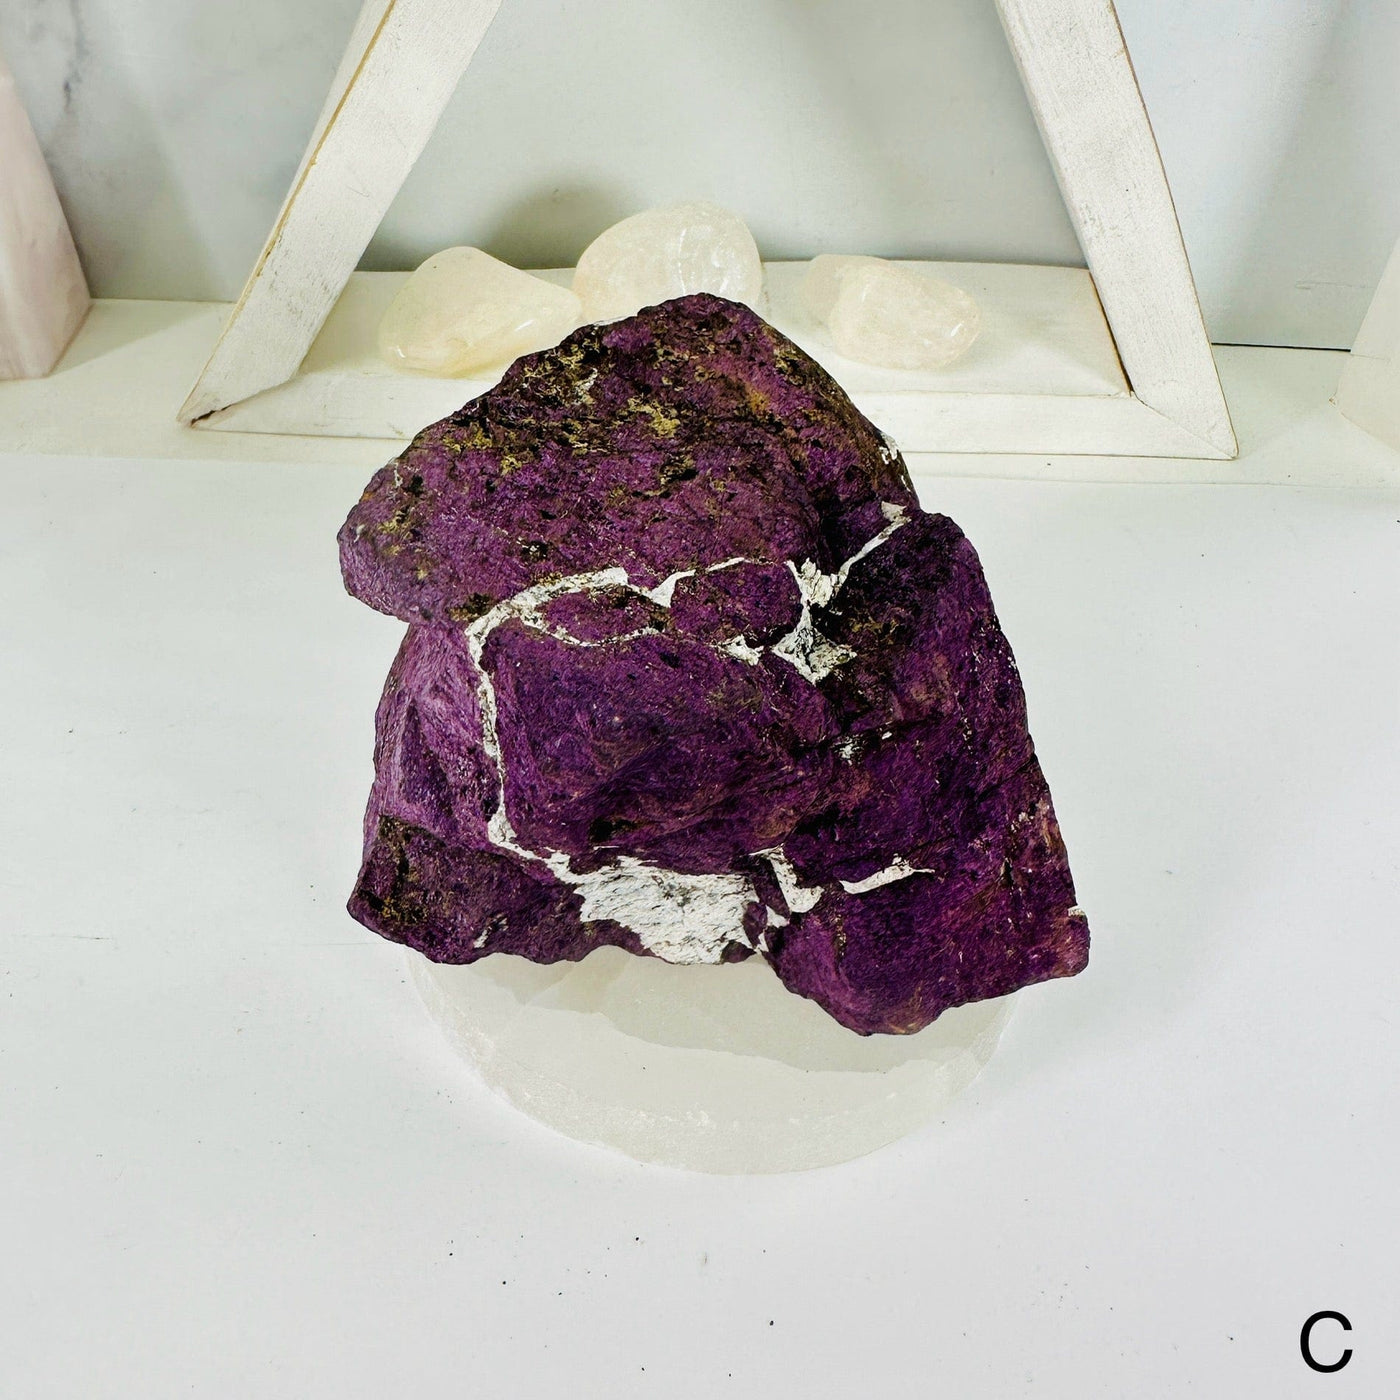 Purpurite Crystal Natural Rough Stone - YOU CHOOSE variant C labeled